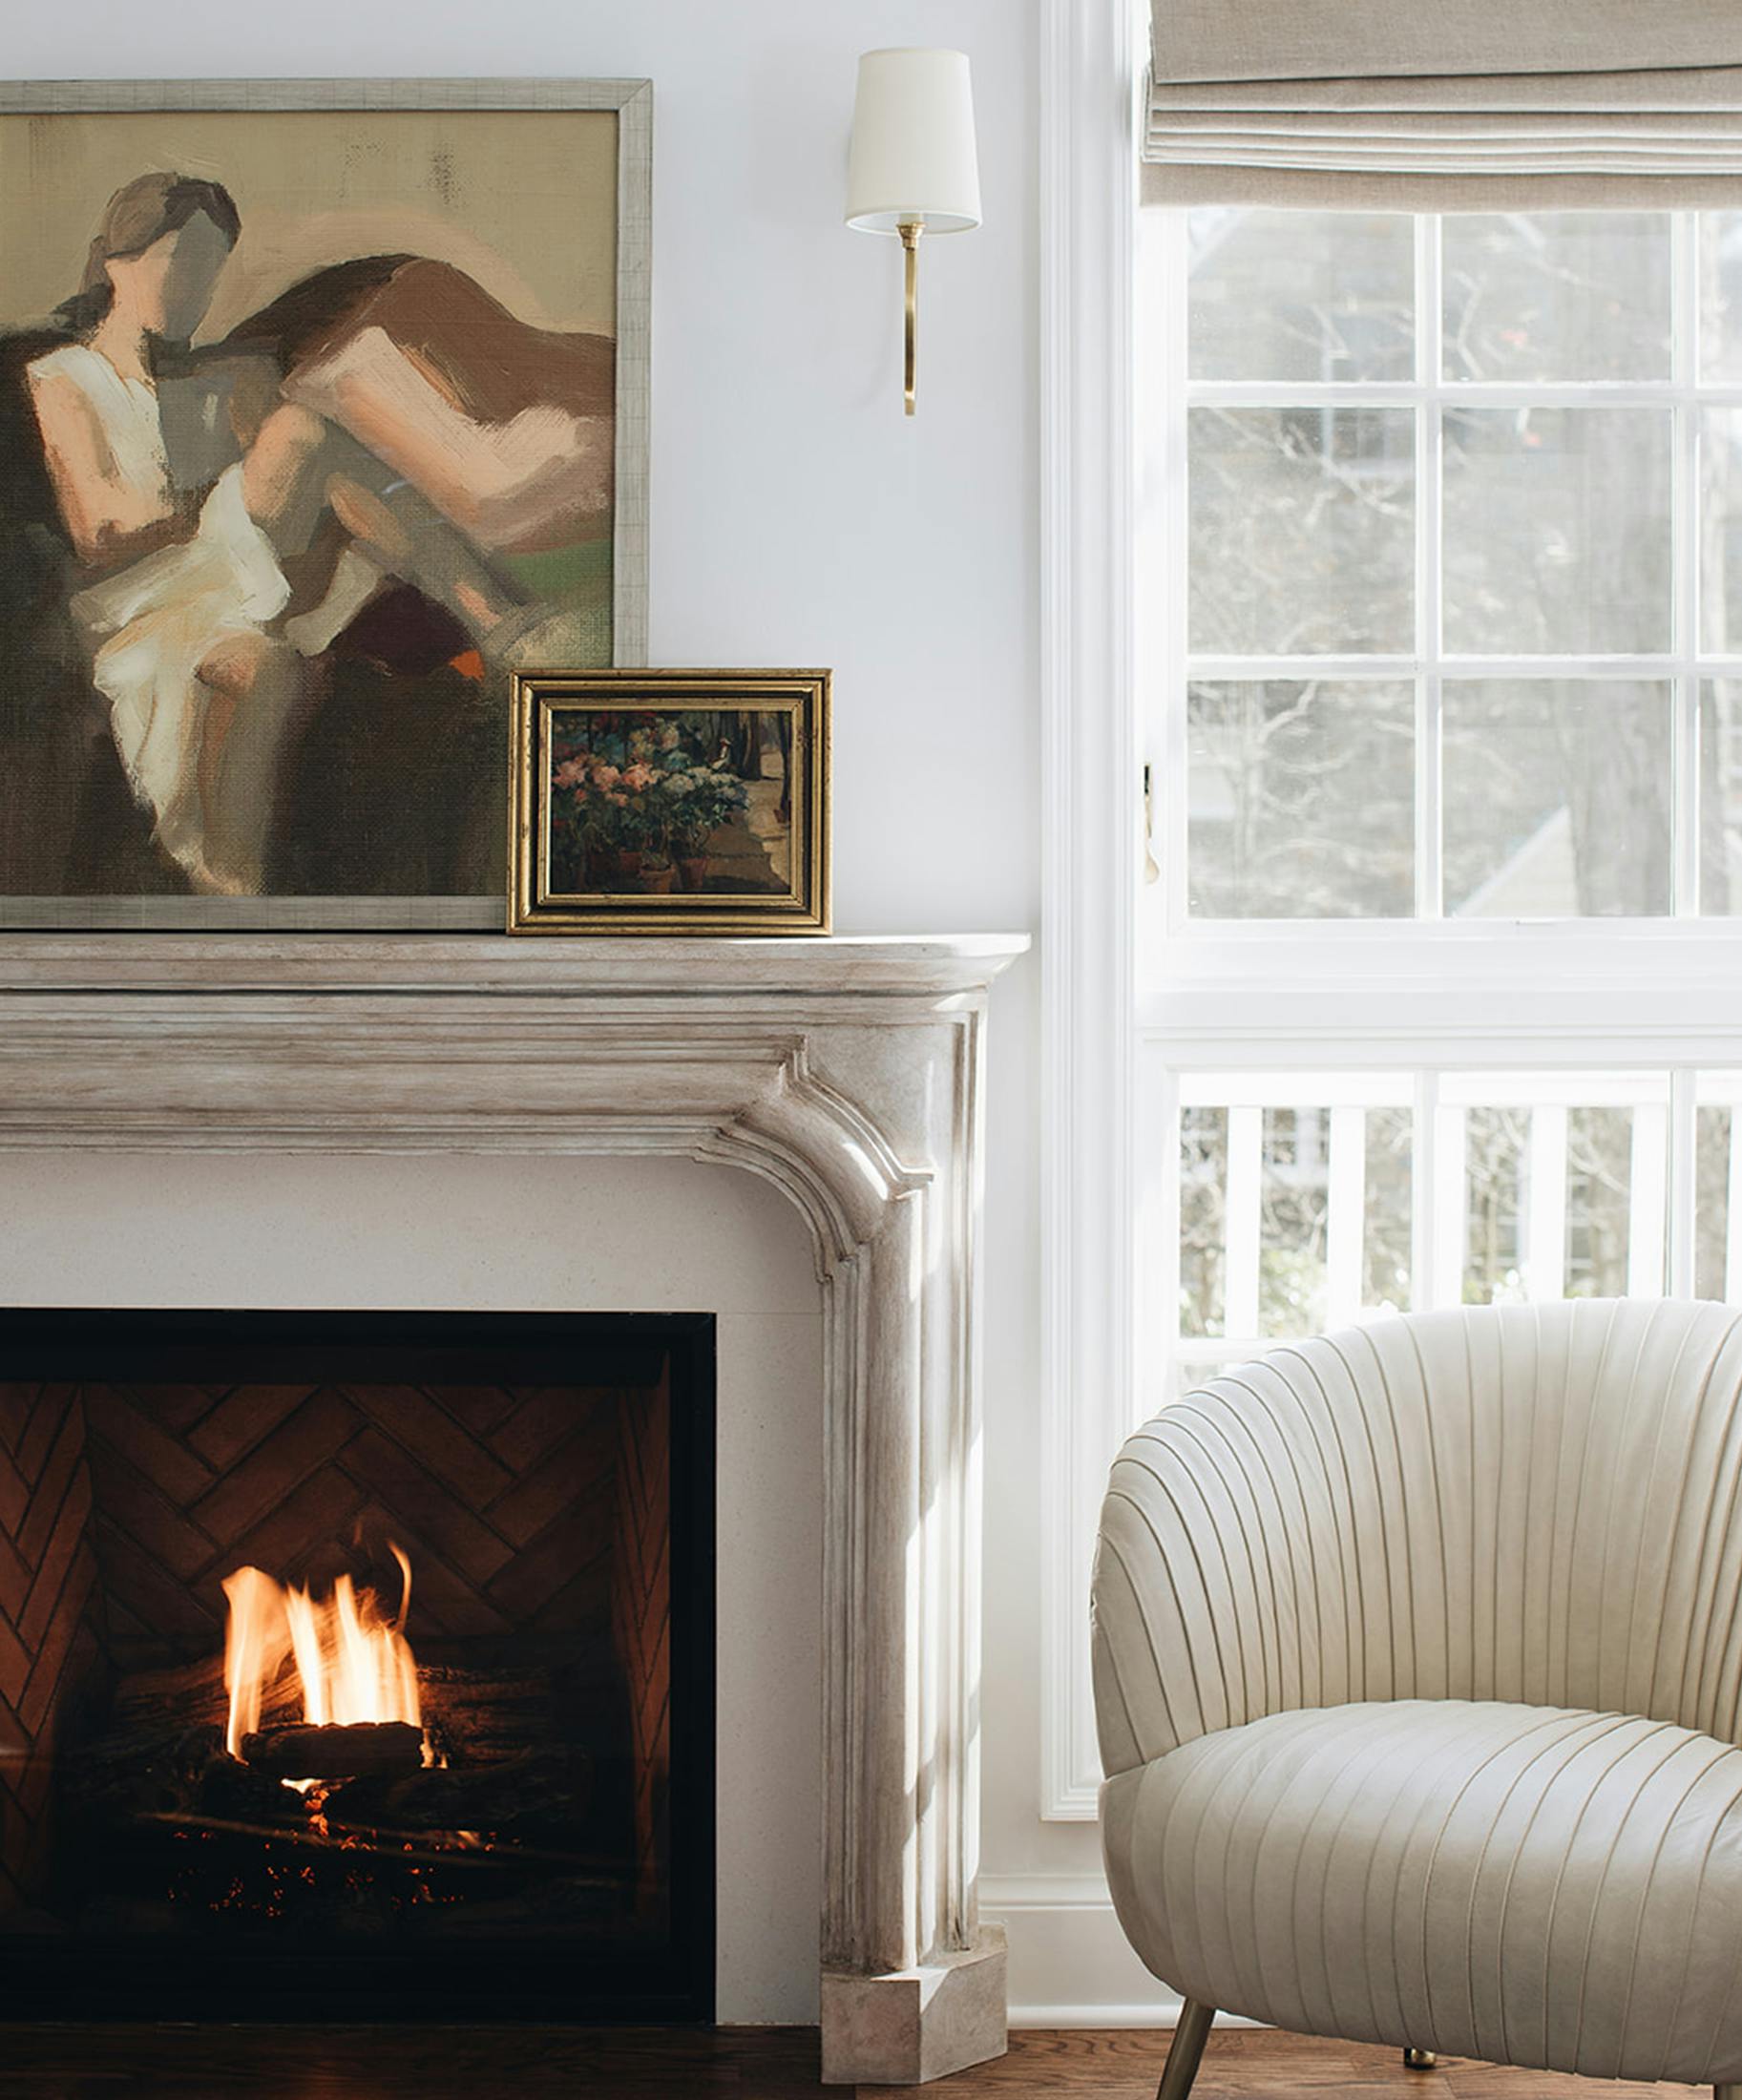 Nicole-Green-Design-Project-Chevy-Chase-Historic-East-Coast-Home-Main-Bedroom-Fireplace